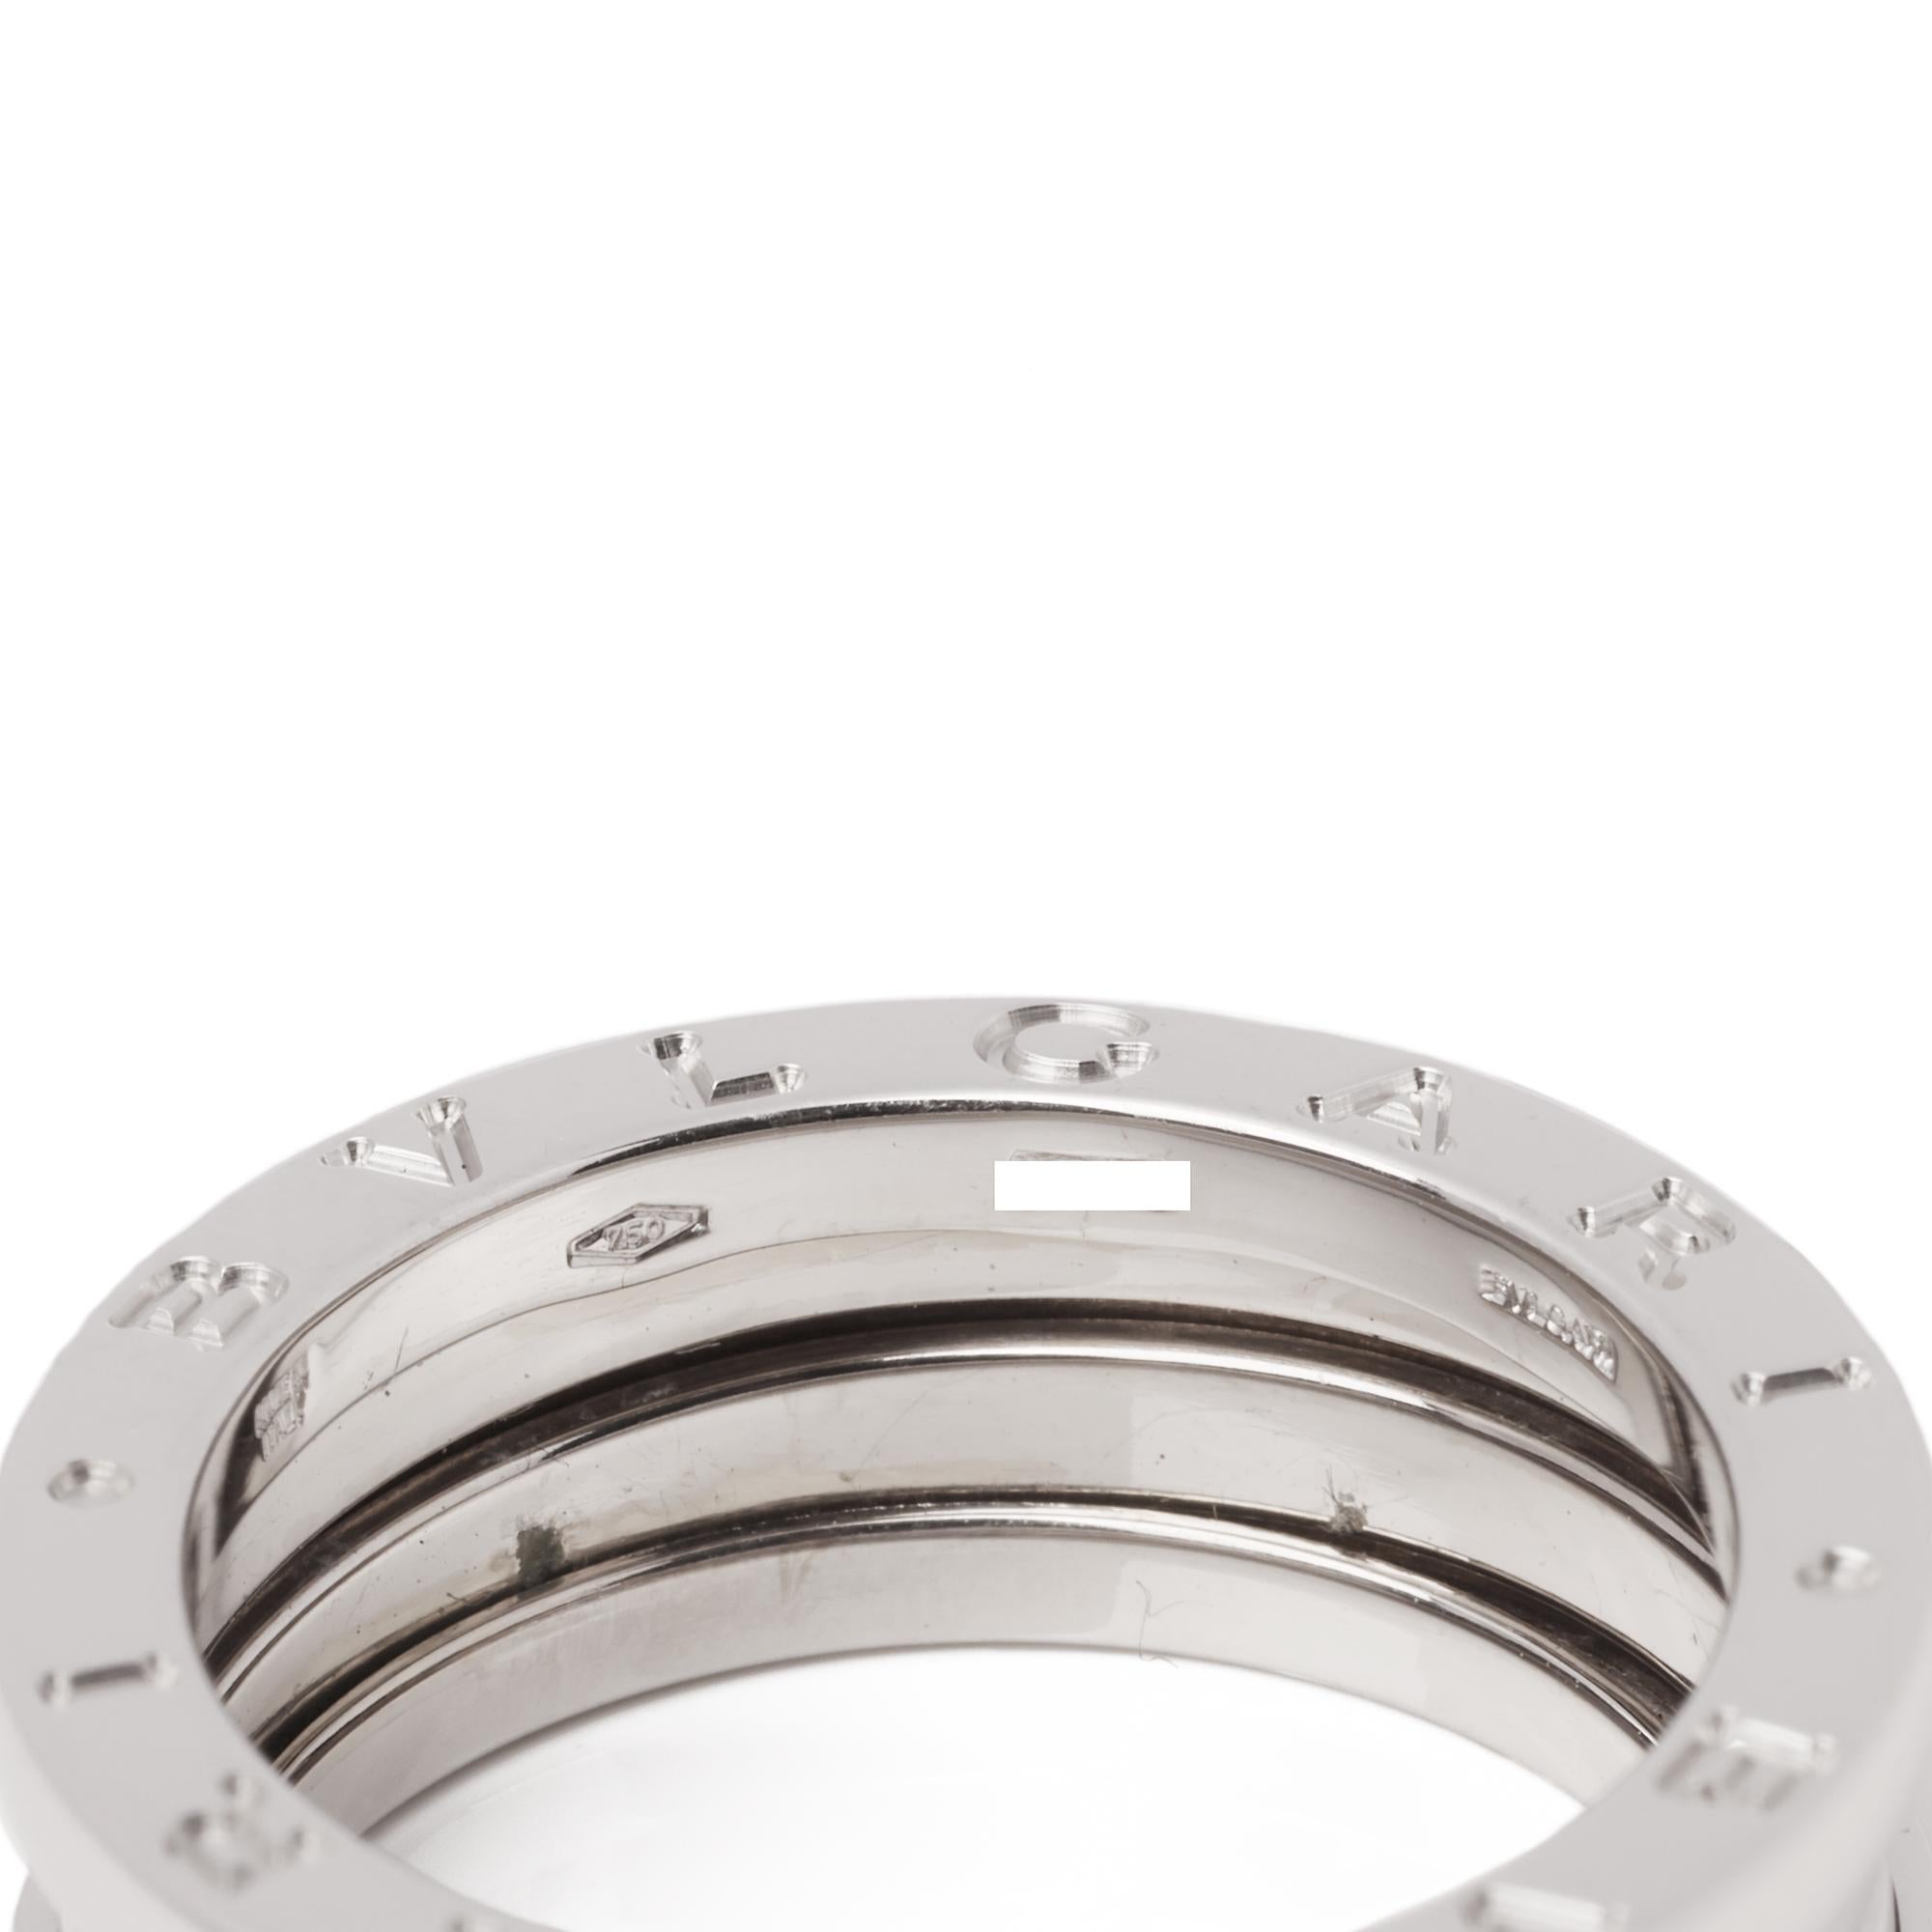 This ring by Bulgari is from their B Zero 1 collection and features a distinctive three band spiral design in 18ct white gold. UK ring size N, EU ring size 54, US ring size 7. Complete with Bulgari box. 